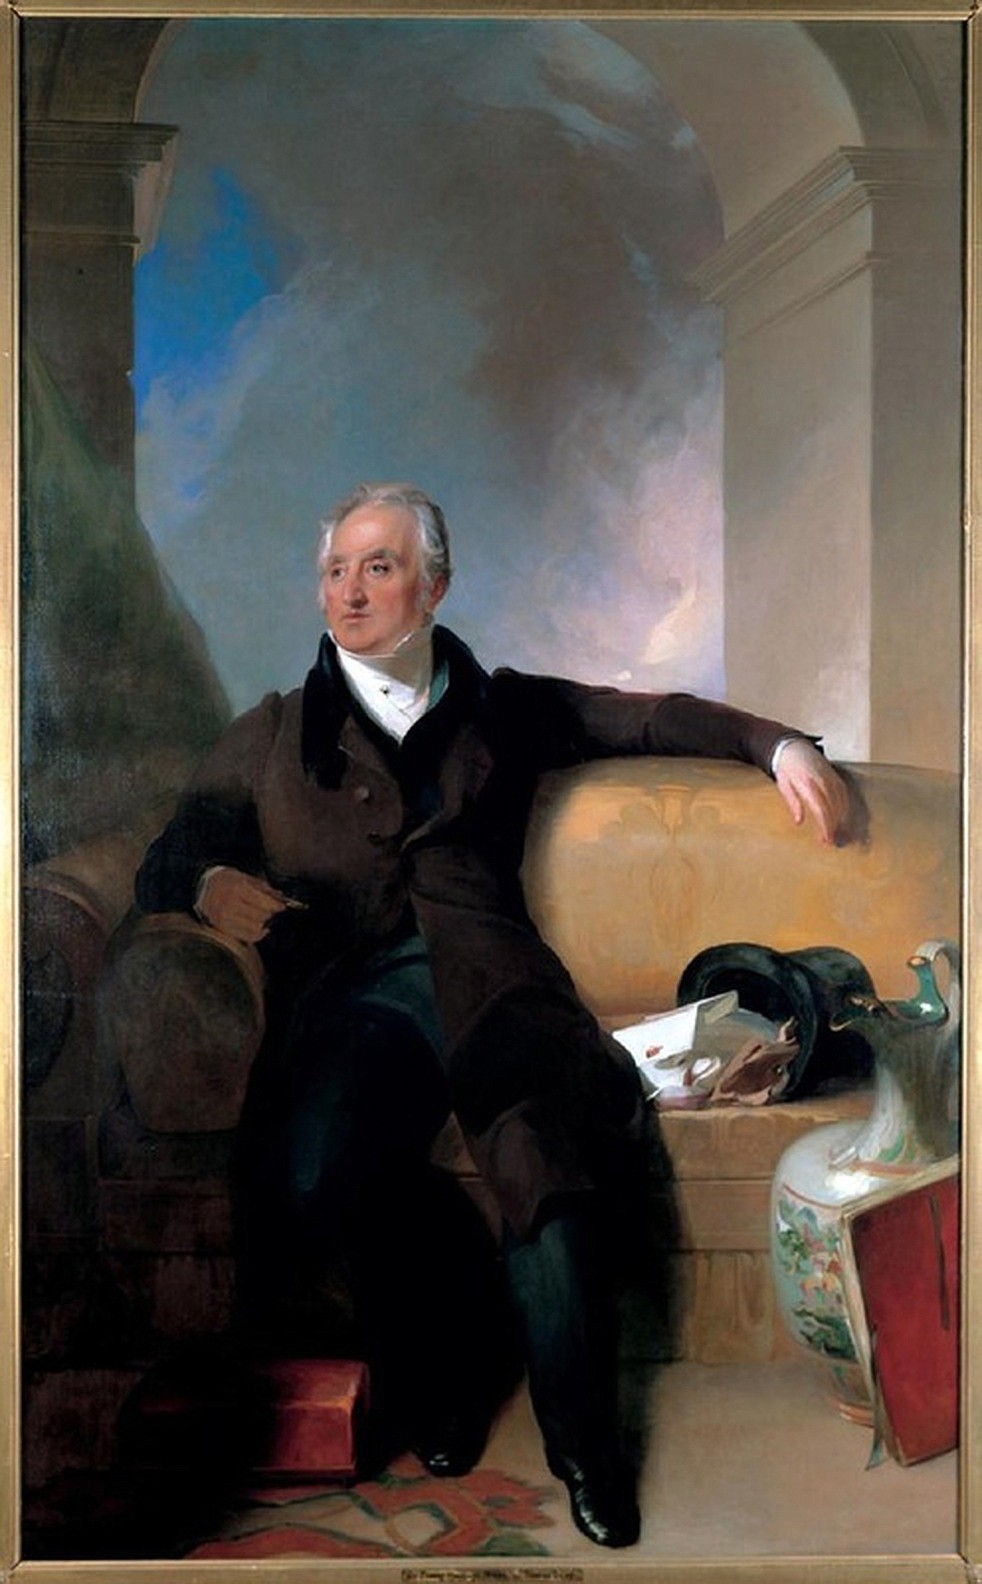 LIBRARY OF CONGRESS
Colonel Thomas Handasyd Perkins (1764-1854) made his fortune in slave trading and opium smuggling.